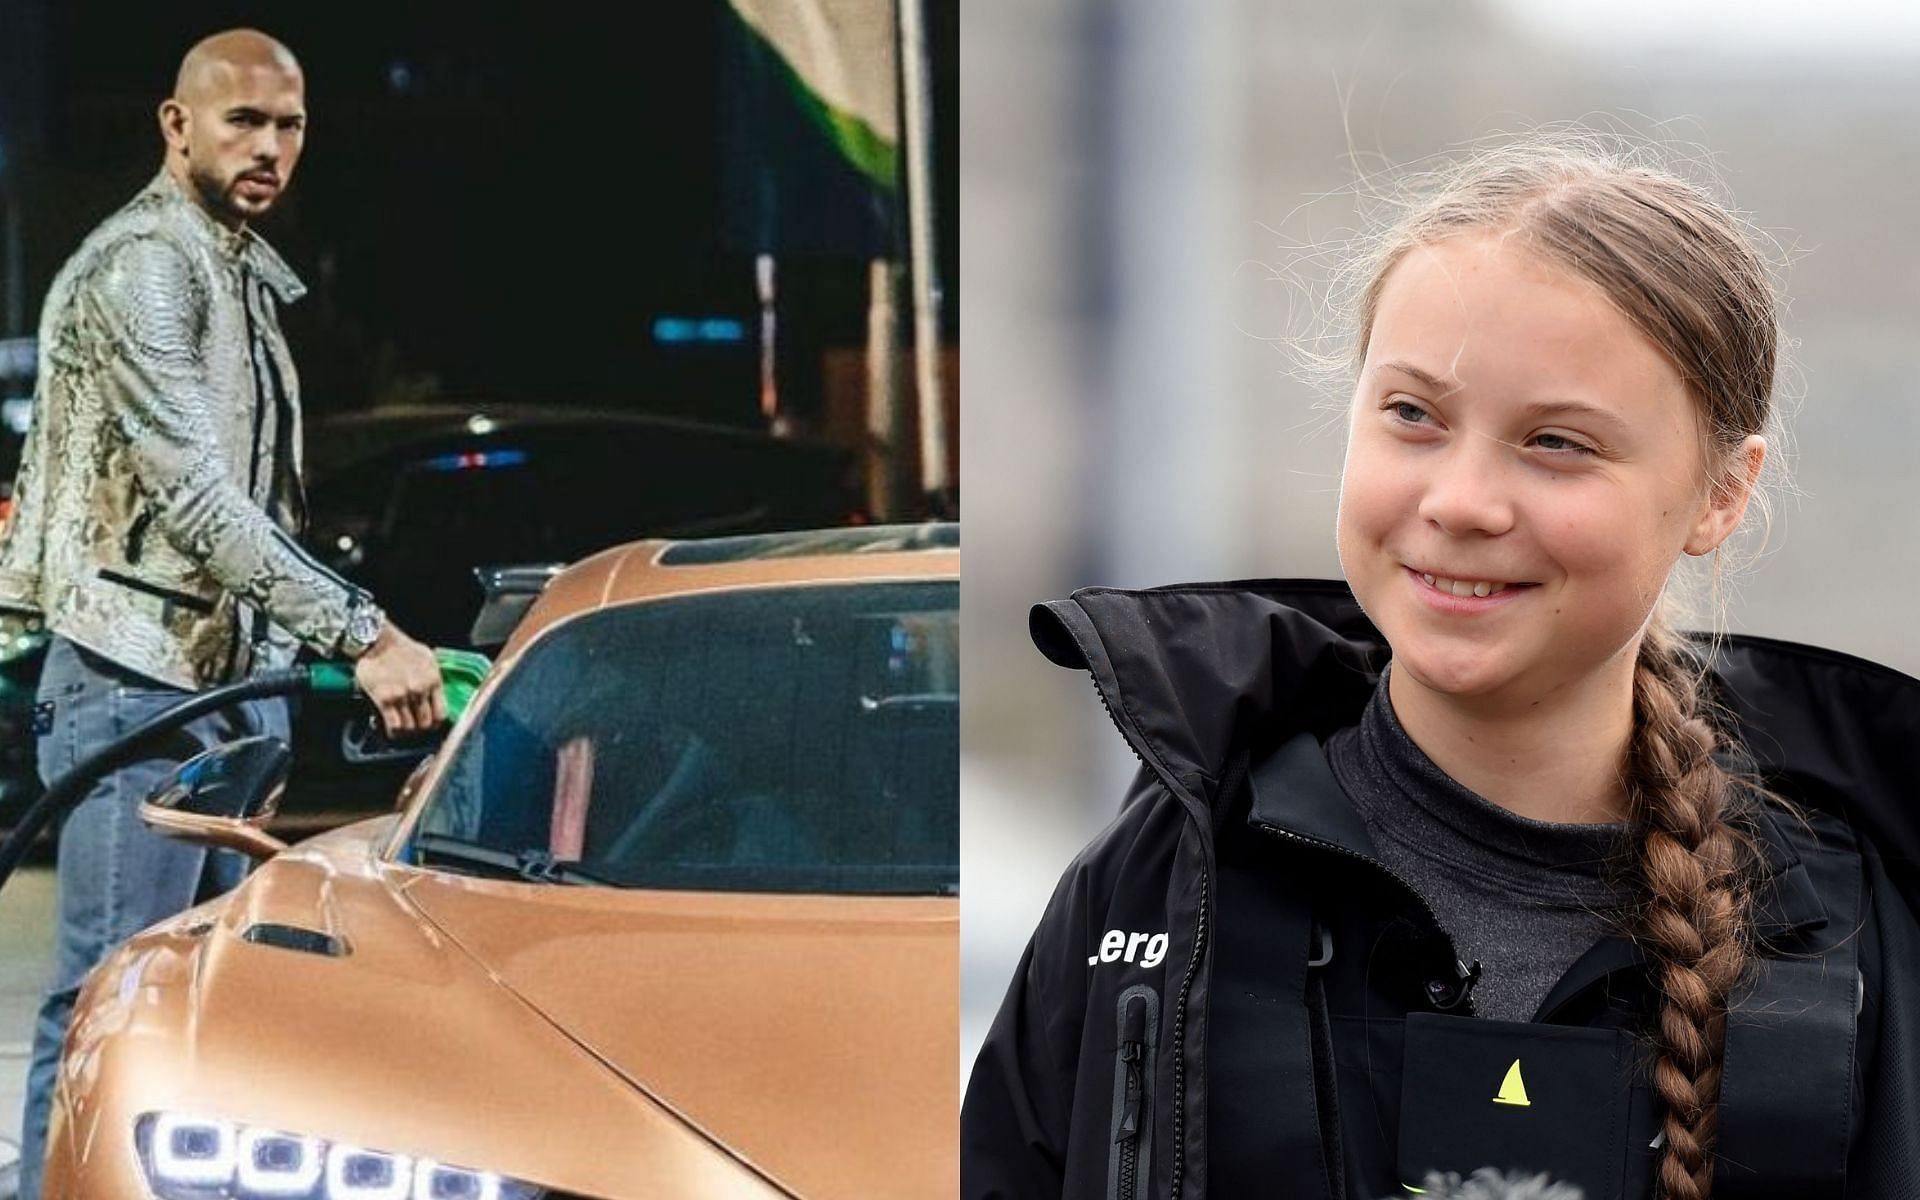 Andrew Tate (left) and Greta Thunberg (right). [Images courtesy: left image from Twitter @Cobratate and right image from Getty Images]